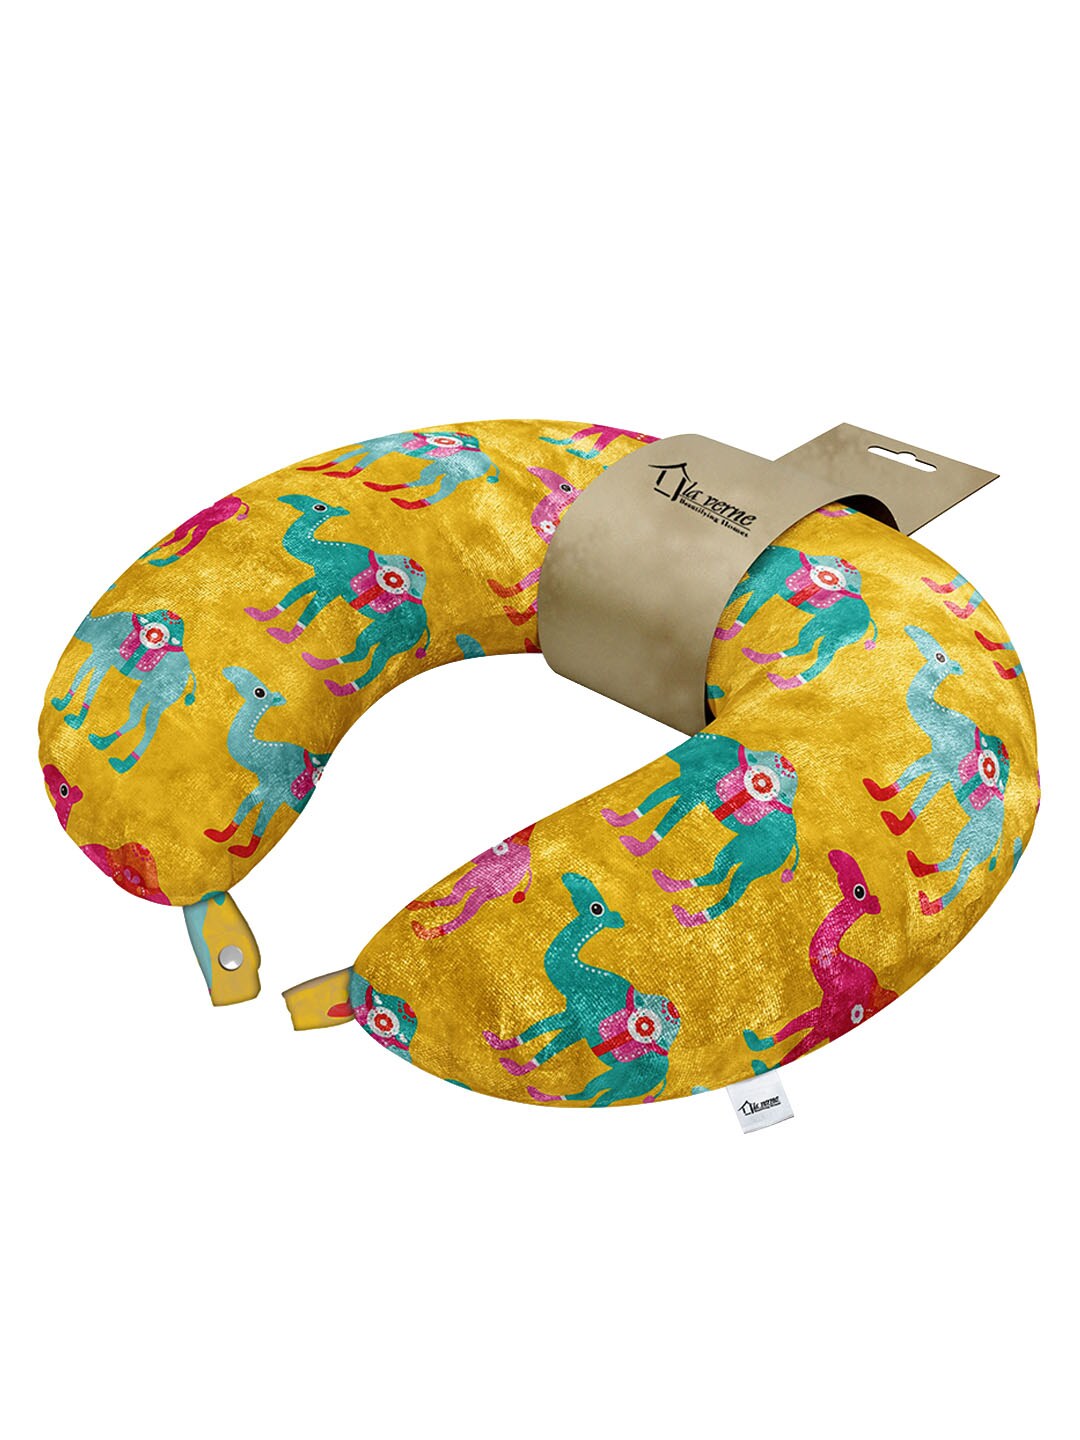 LA VERNE Assorted Printed Travel Neck Pillow Price in India